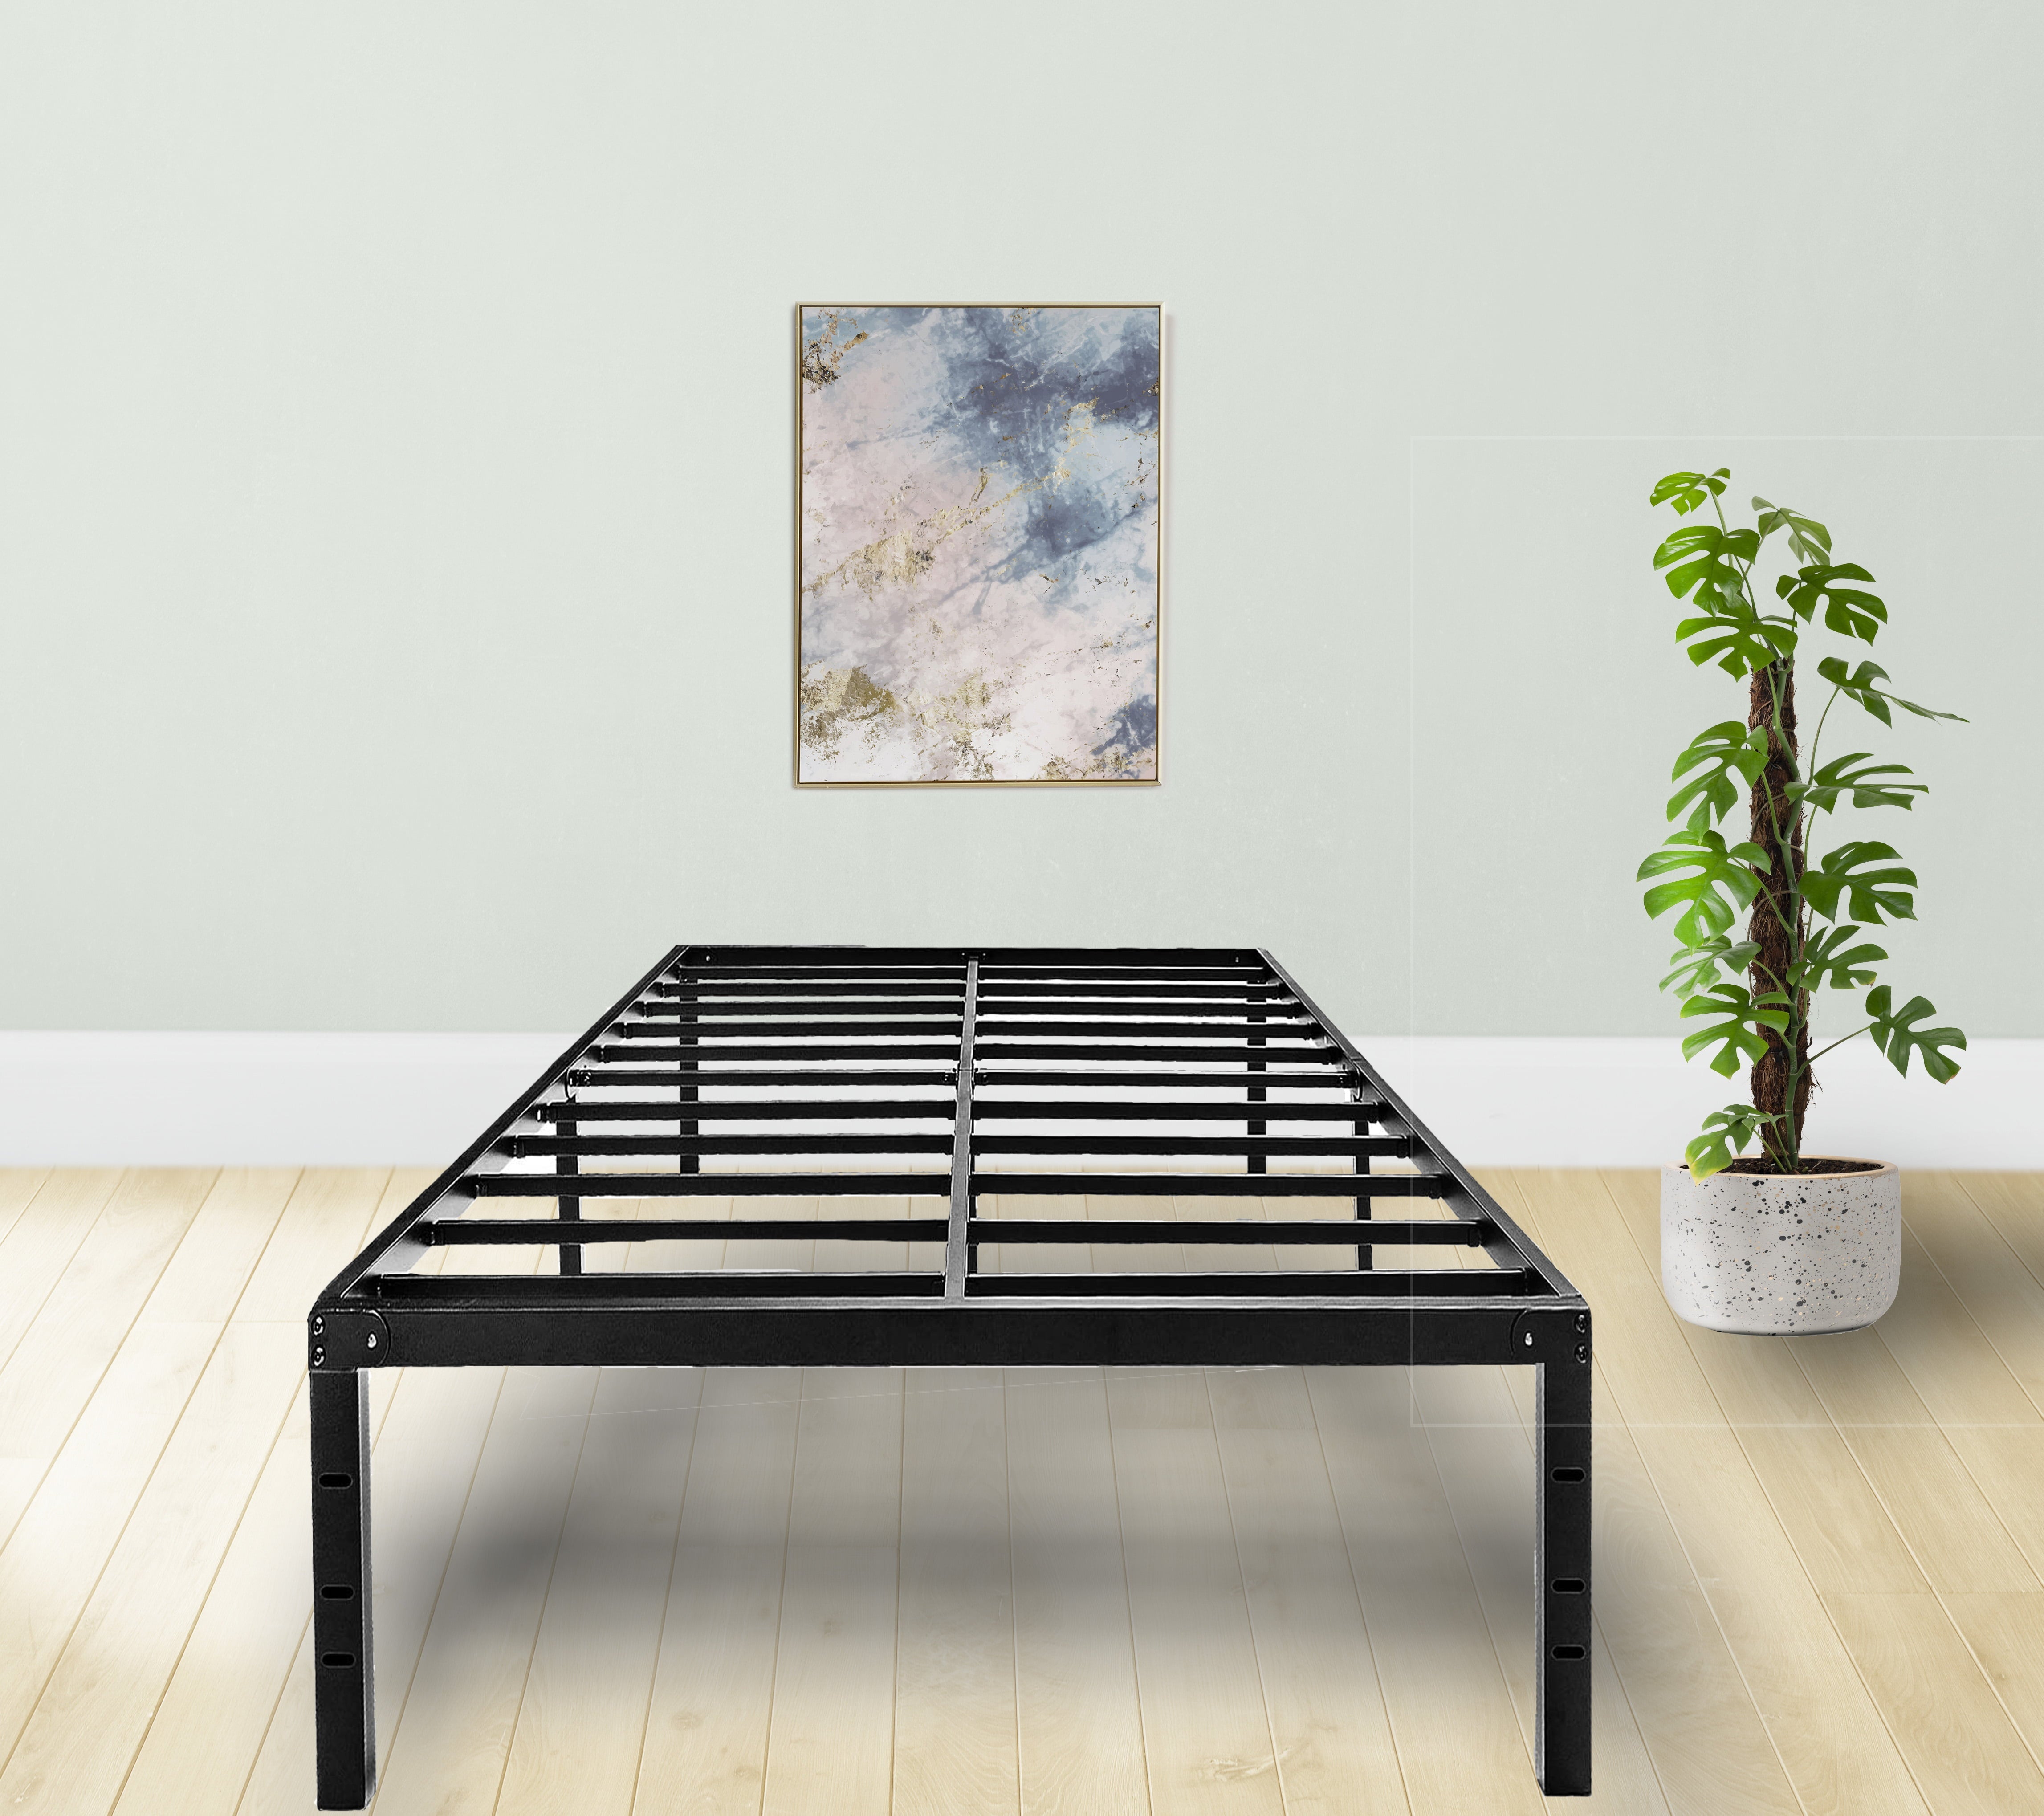 FOYUEE 18 inch Full Bed Frame No Box Spring Needed, Tall Platform Bedframe with Storage Black Metal